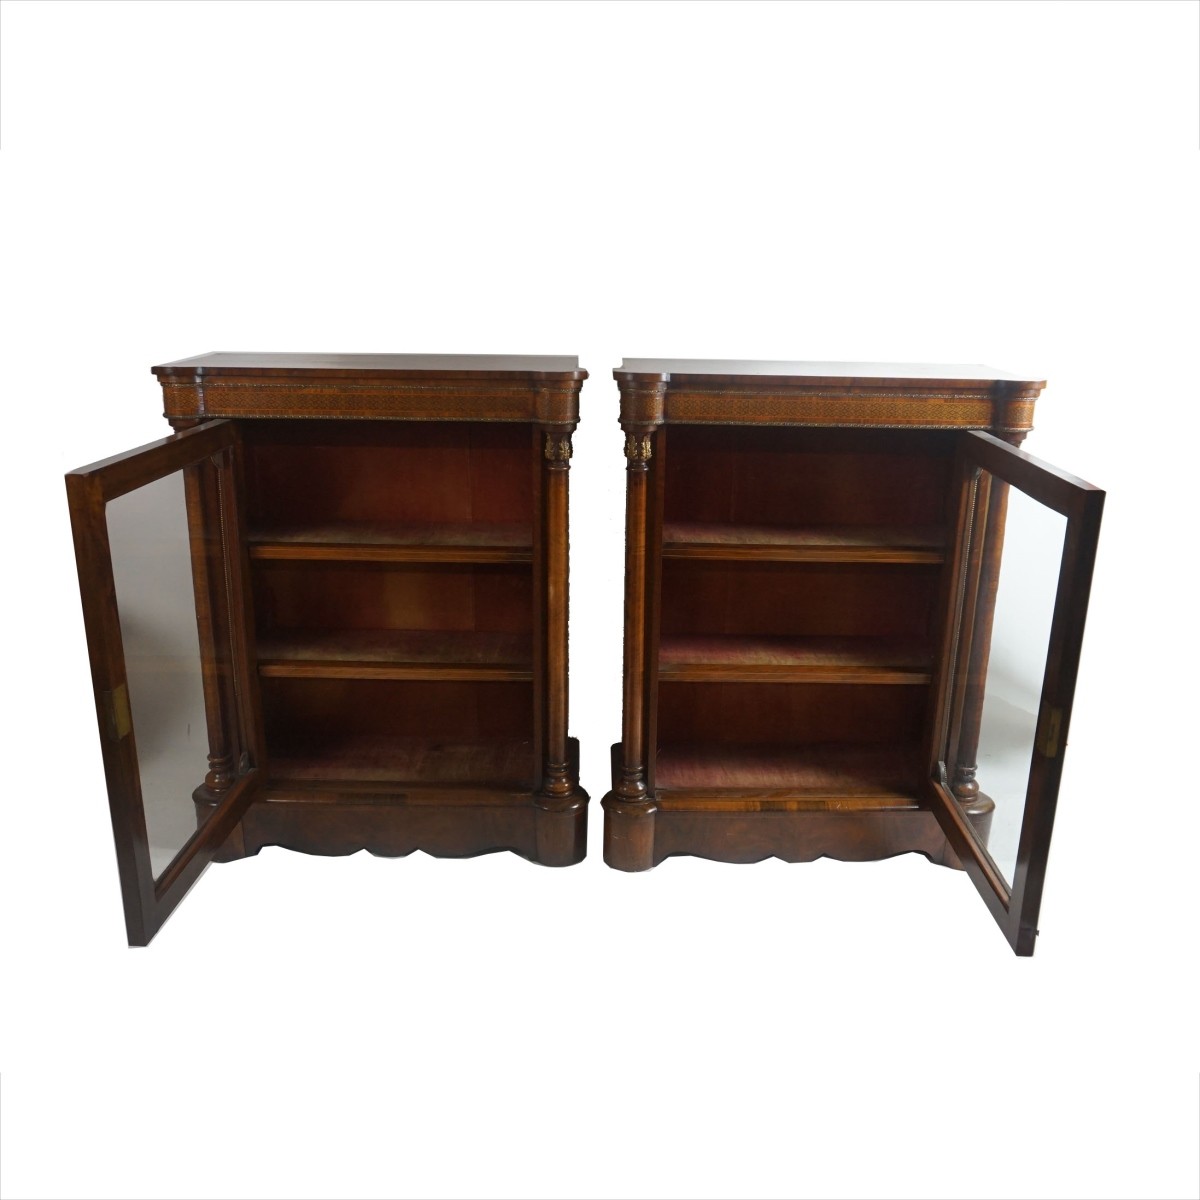 Pair of Cabinets / Book Cases